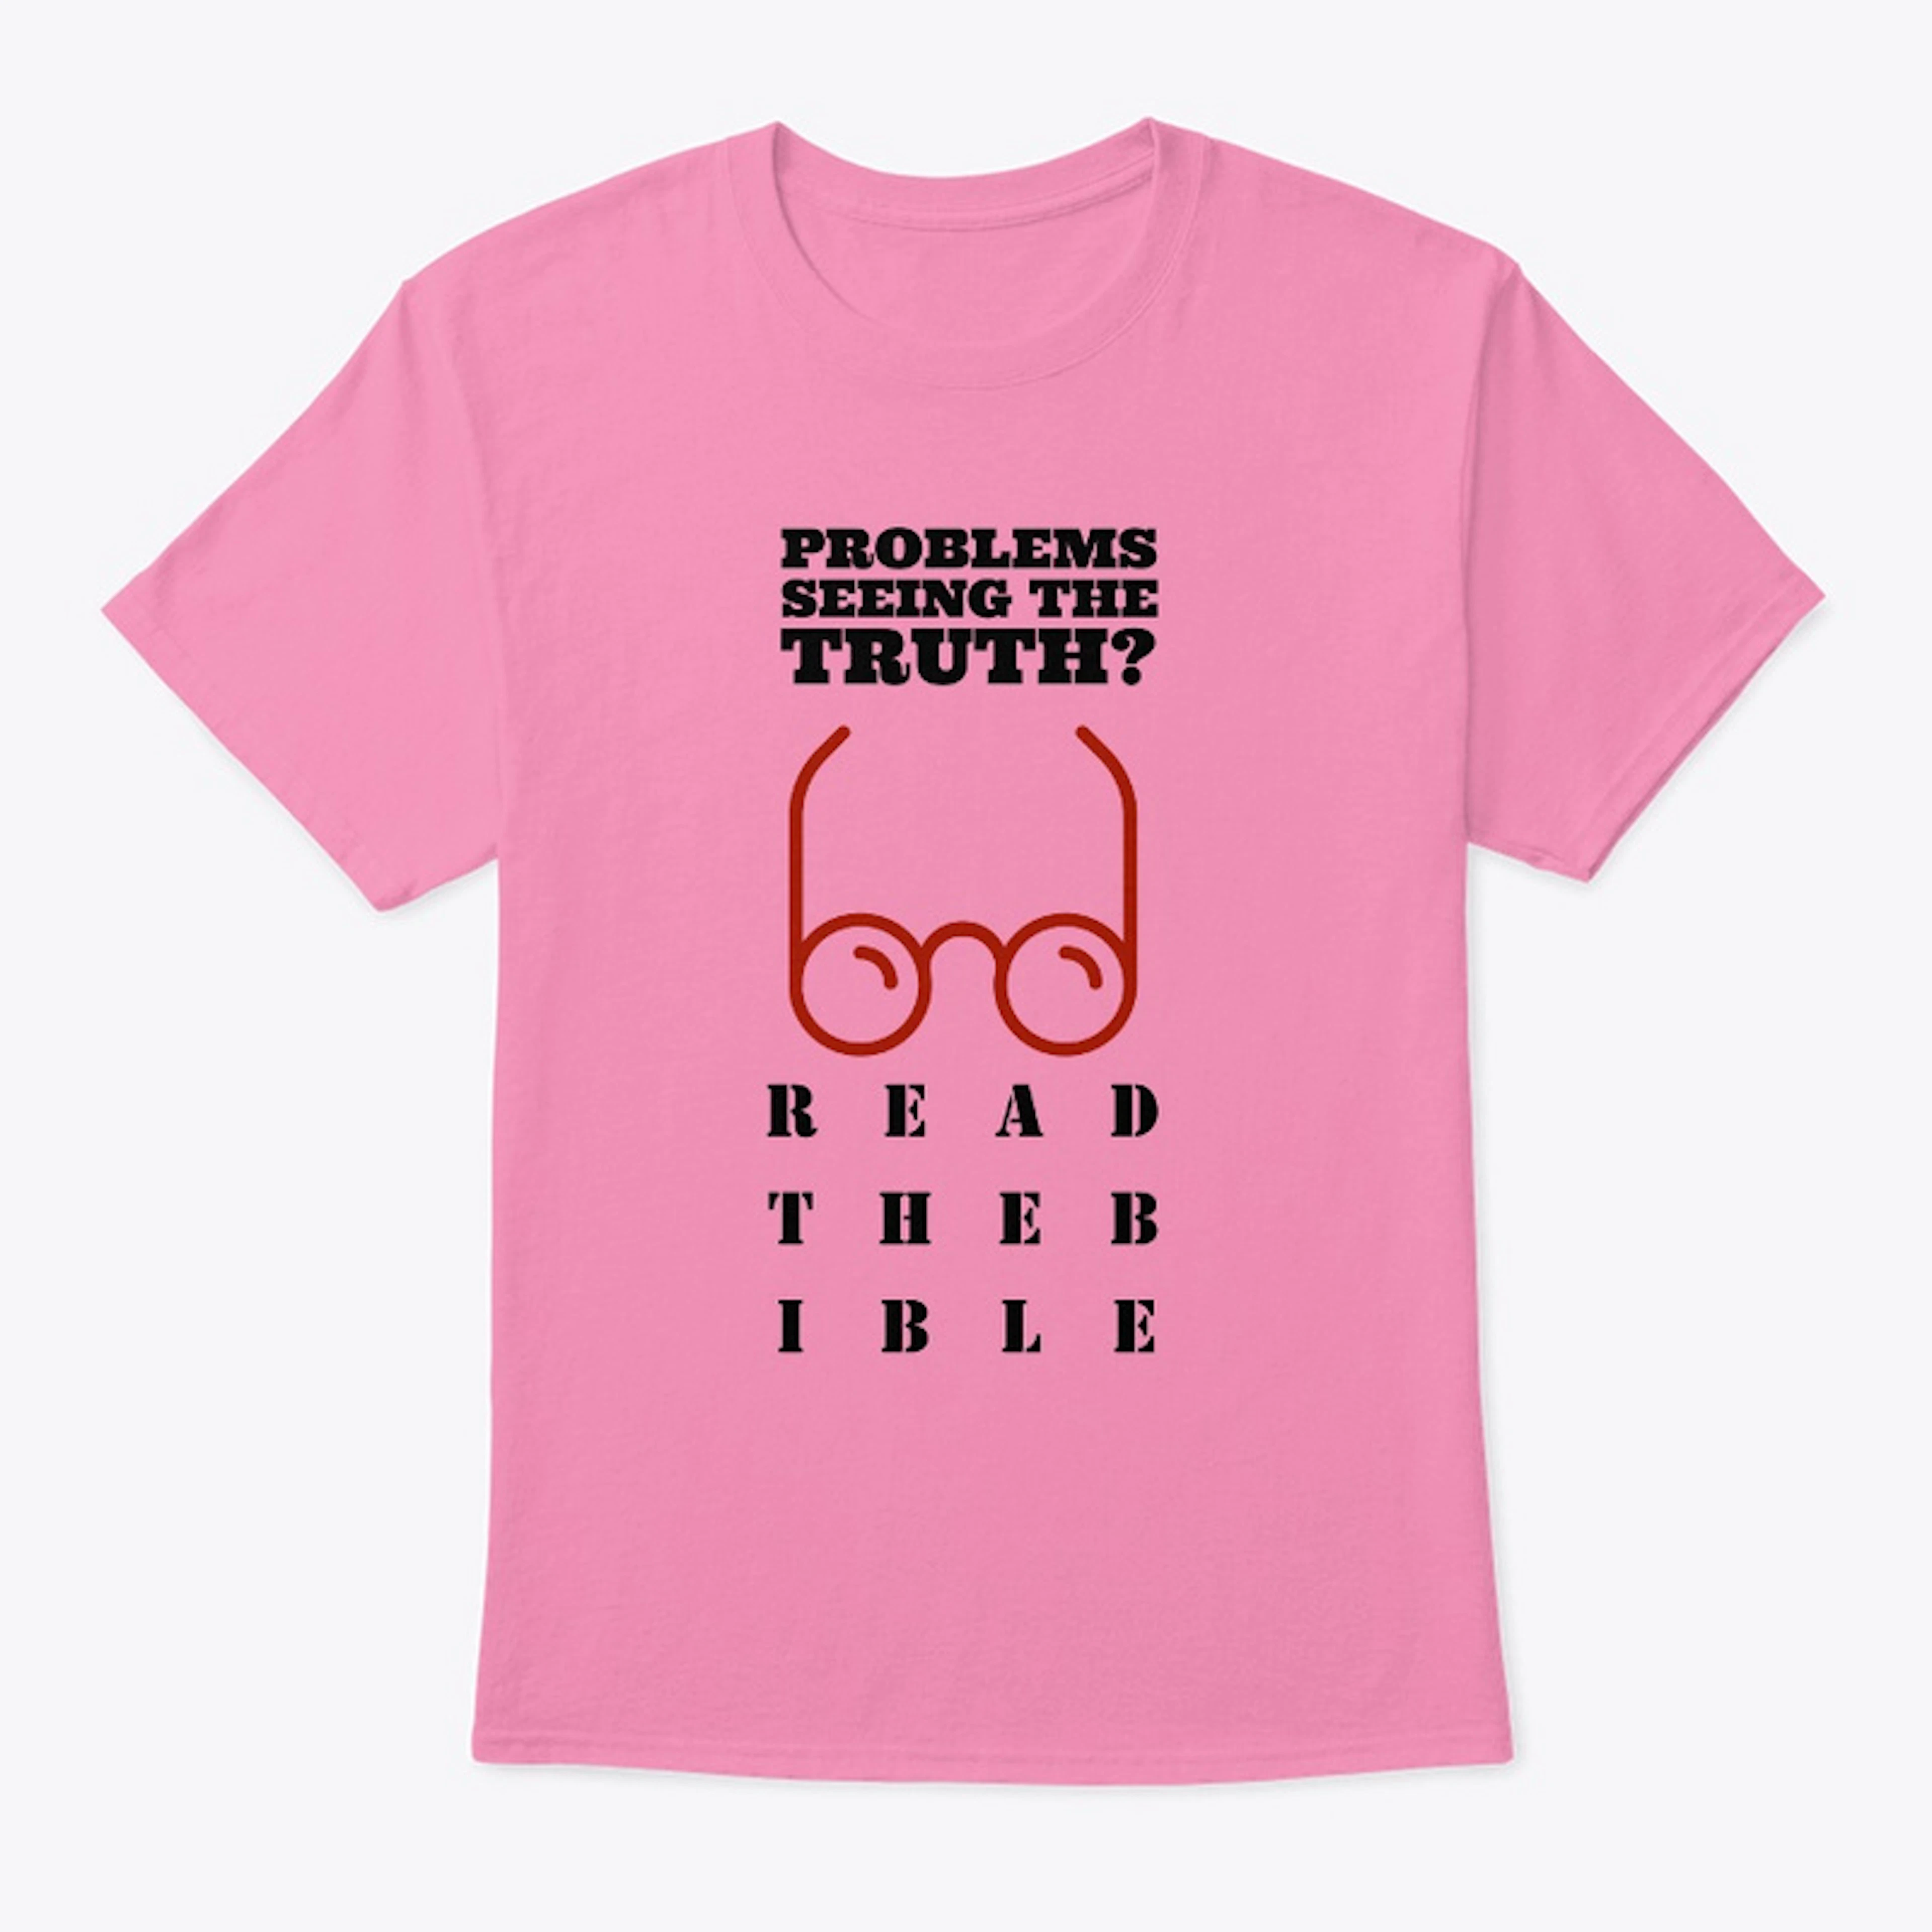 See the truth, read the Bible T-shirt 